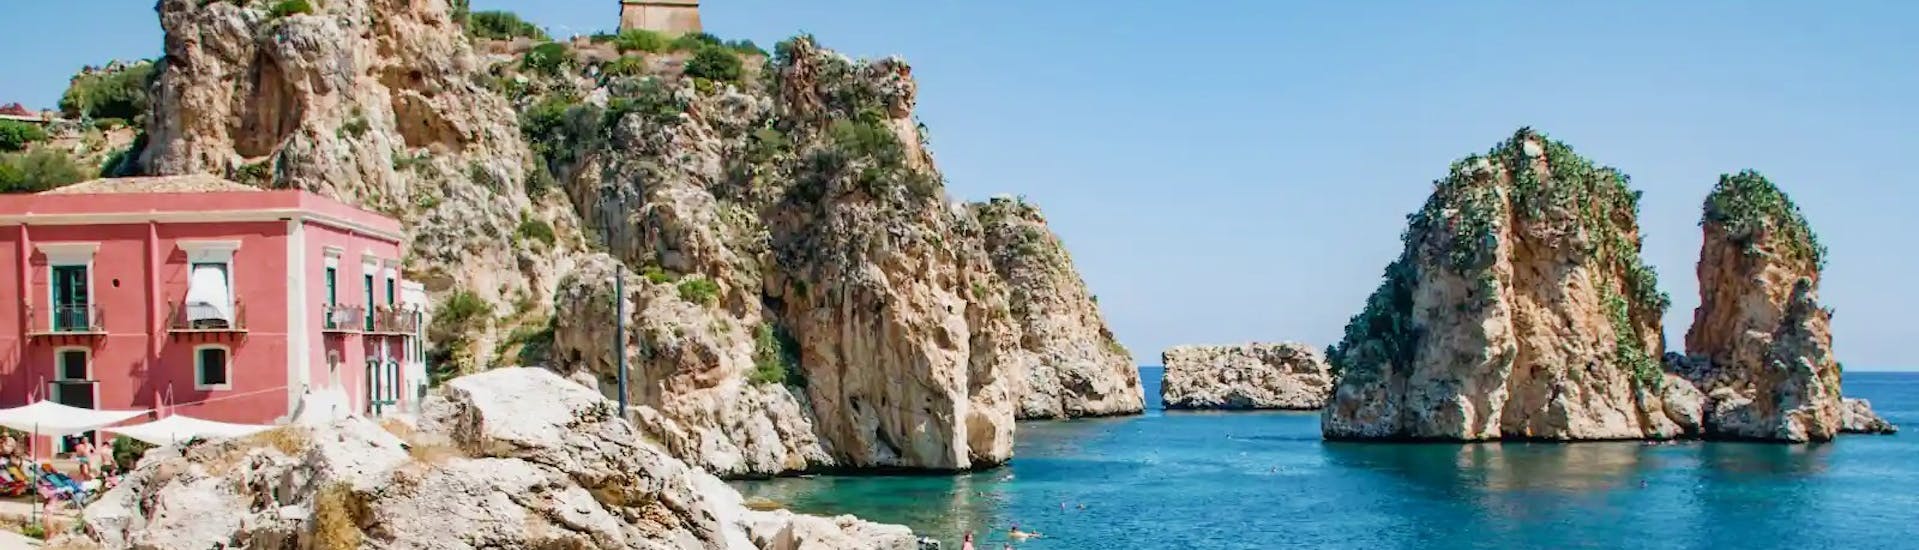 Photo of Scopello, the beautiful Sicilian edge that you can visit with a boat rental in San Vito Lo Capo (up to 6 persons) from Marina Yachting Sicily San Vito Lo Capo.